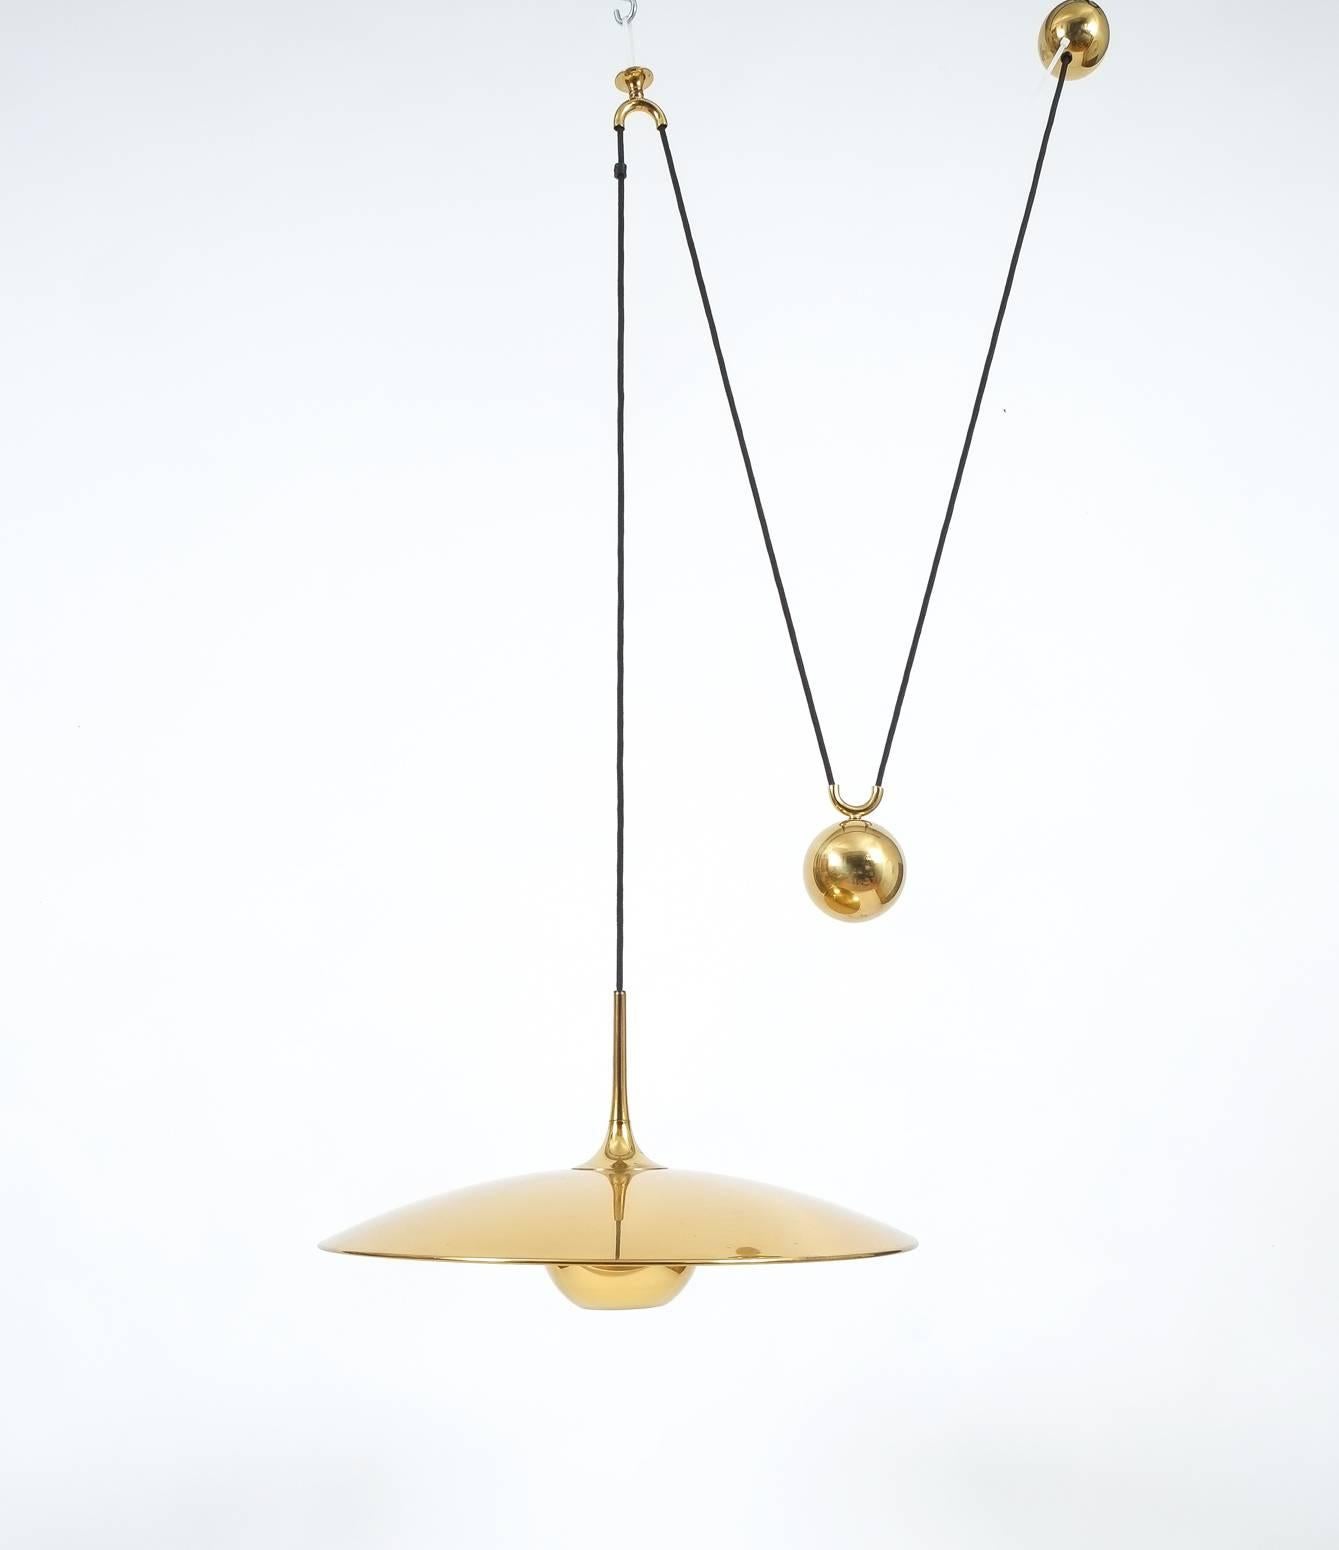 Elegant highly polished brass pendant by Florian Schulz/Germany with a shiny brass finish and heavy counterweight to easily adjust the light in height. Excellent condition, it holds one bulb with a max. of 100Watts. We have more pieces available by